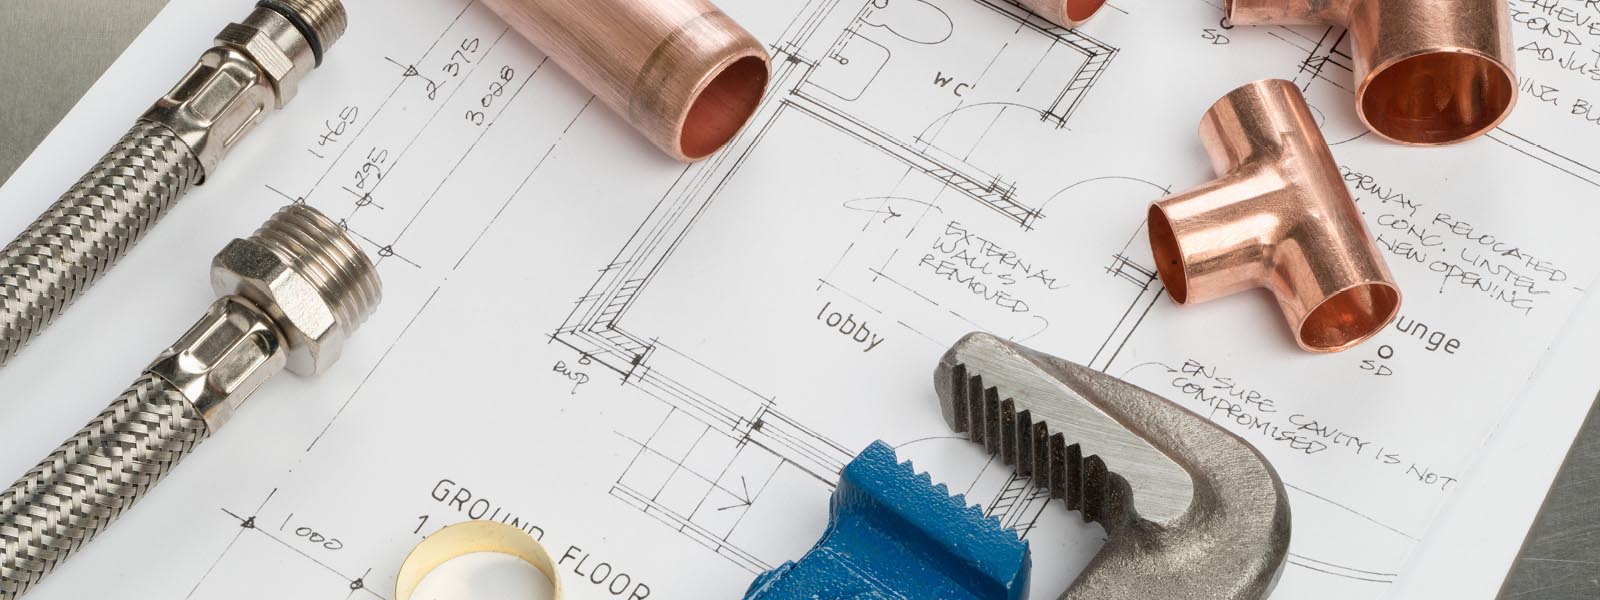 Plumbing plans and tools web